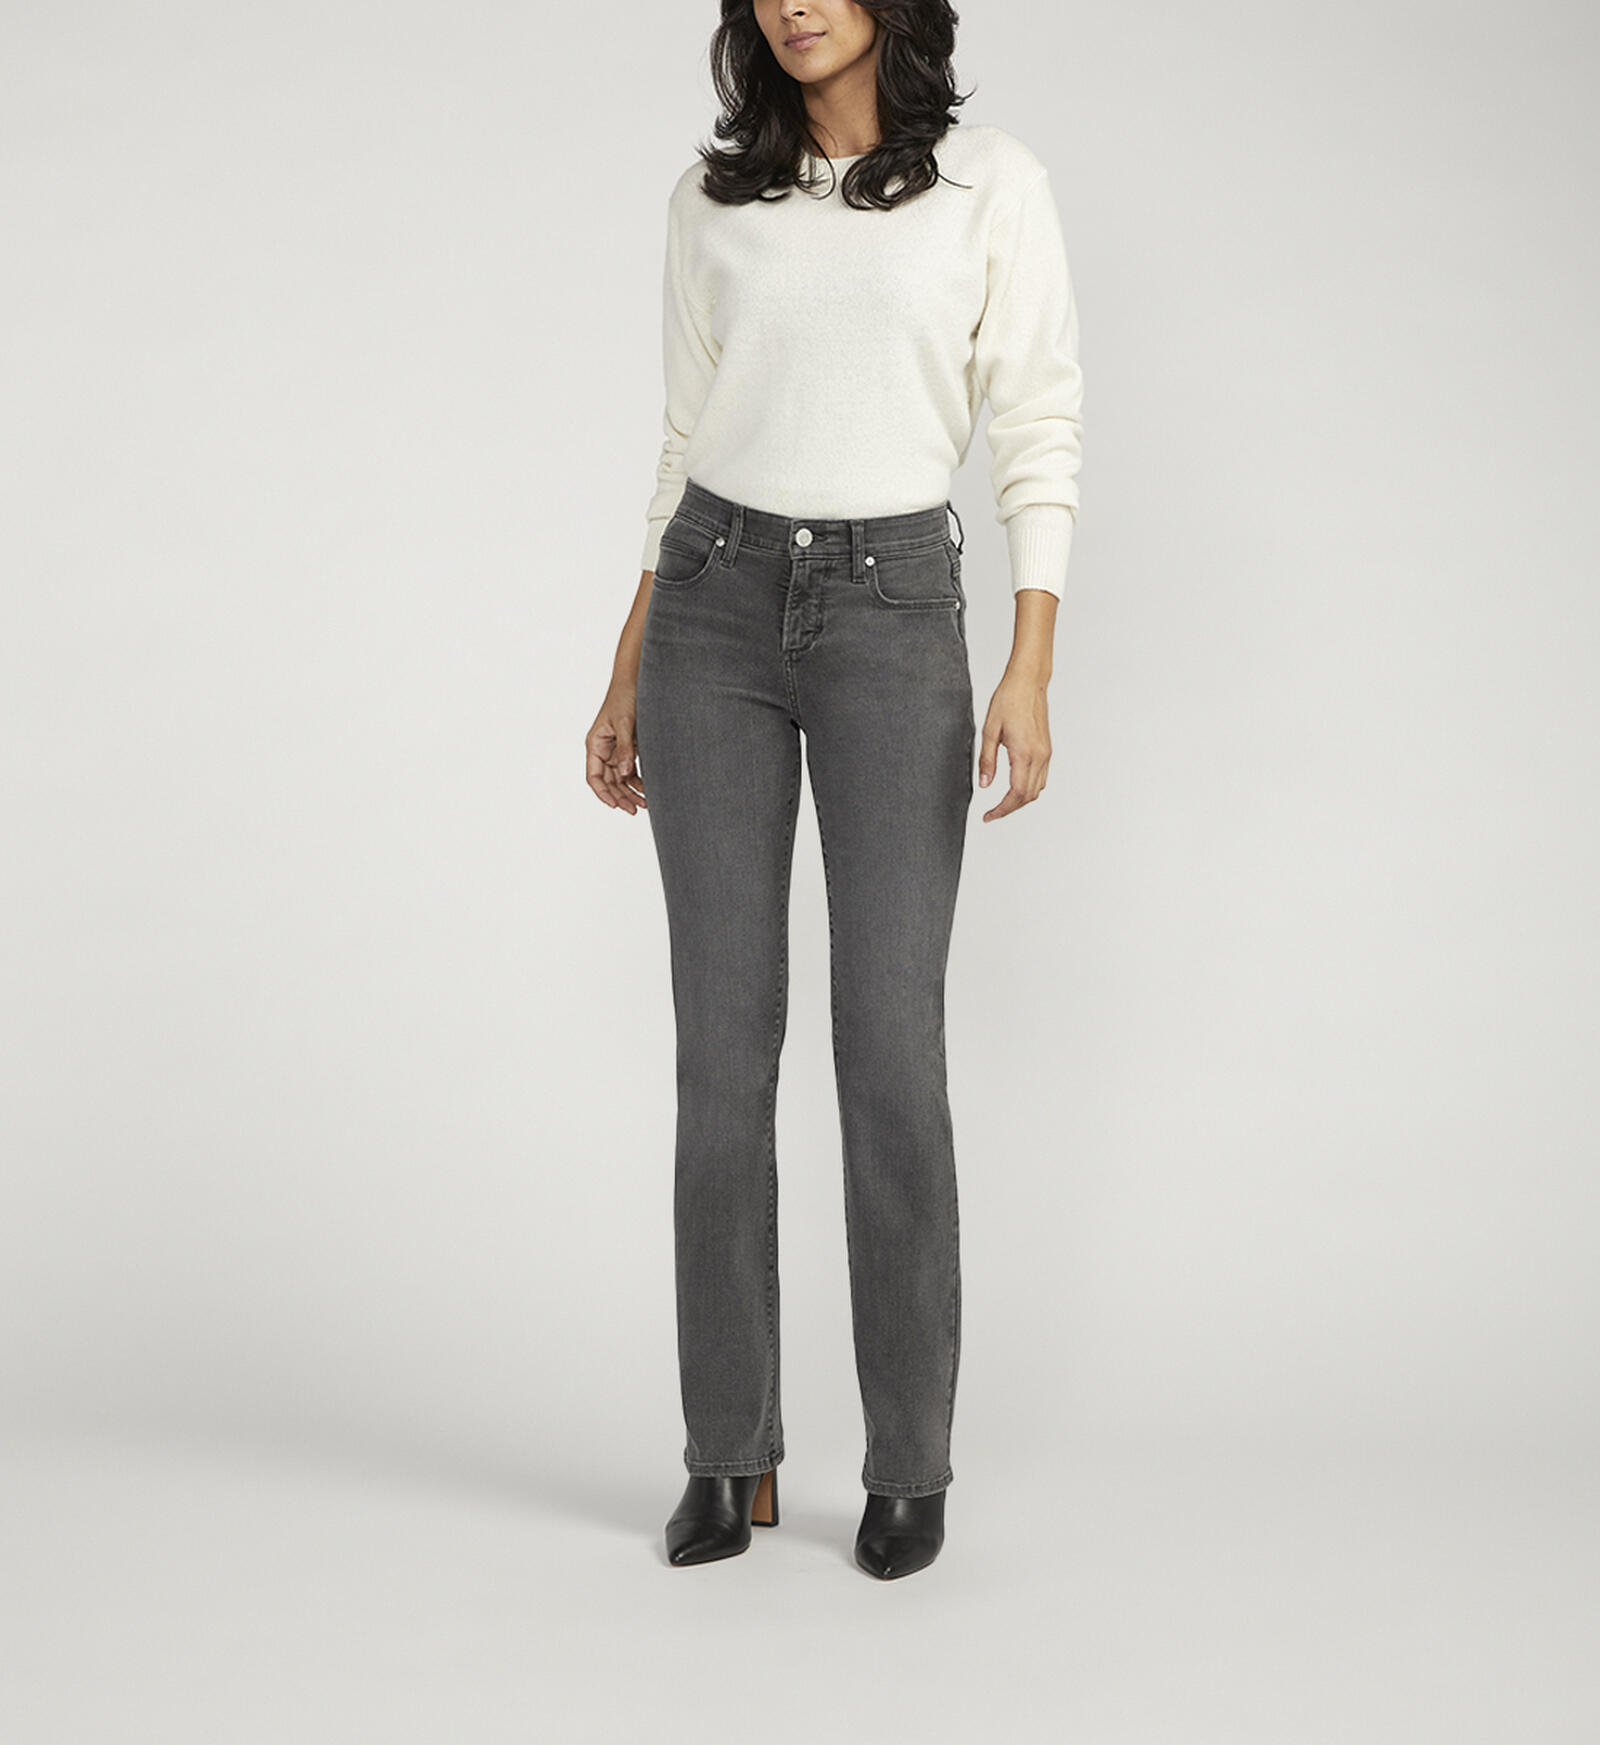 Buy Eloise Mid Rise Bootcut Jeans for CAD 61.00